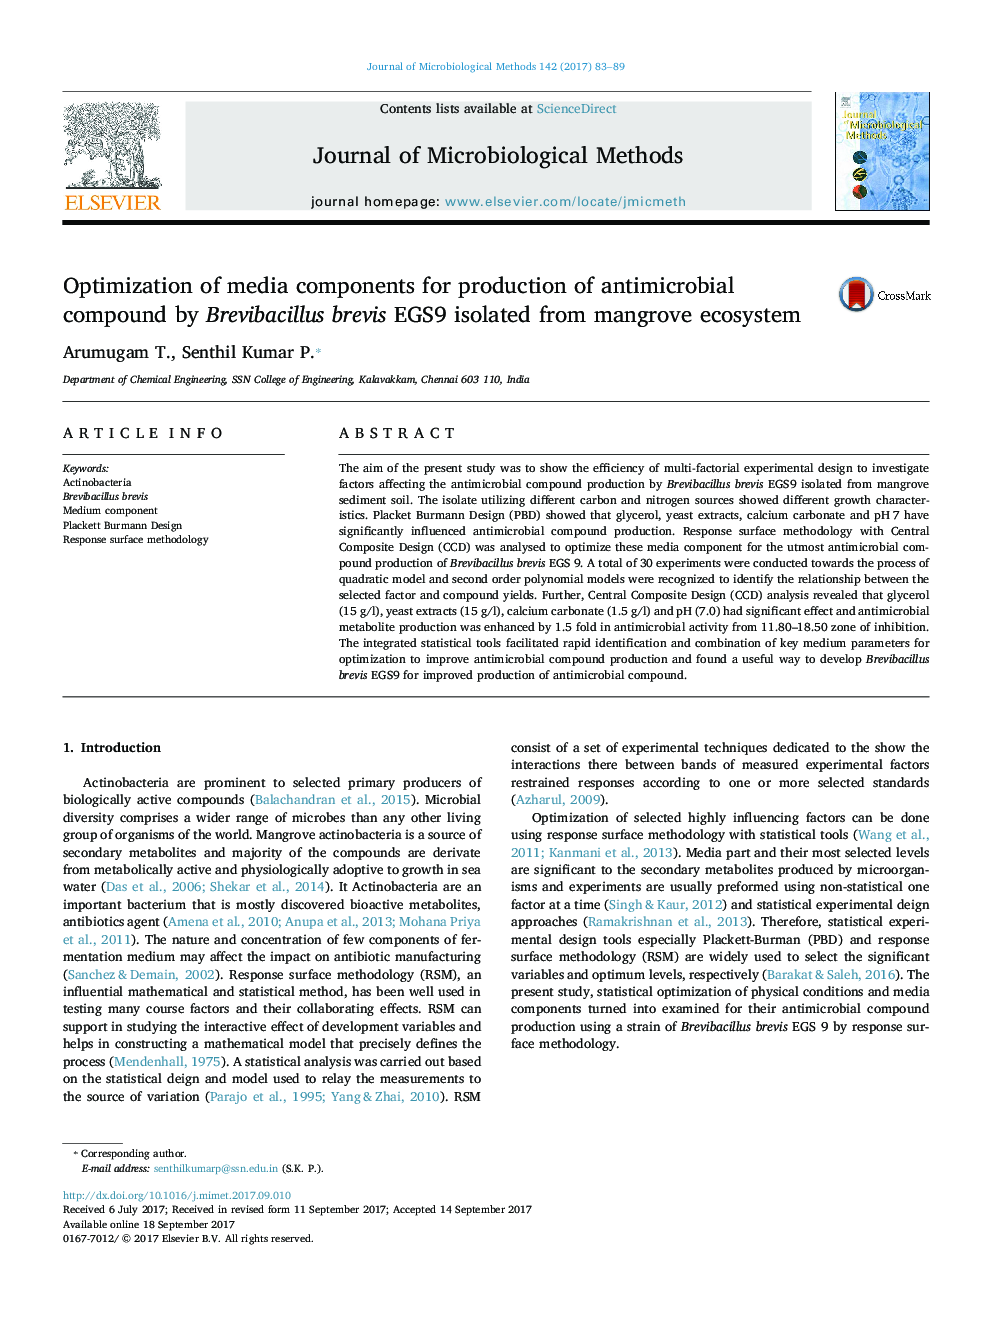 Optimization of media components for production of antimicrobial compound by Brevibacillus brevis EGS9 isolated from mangrove ecosystem